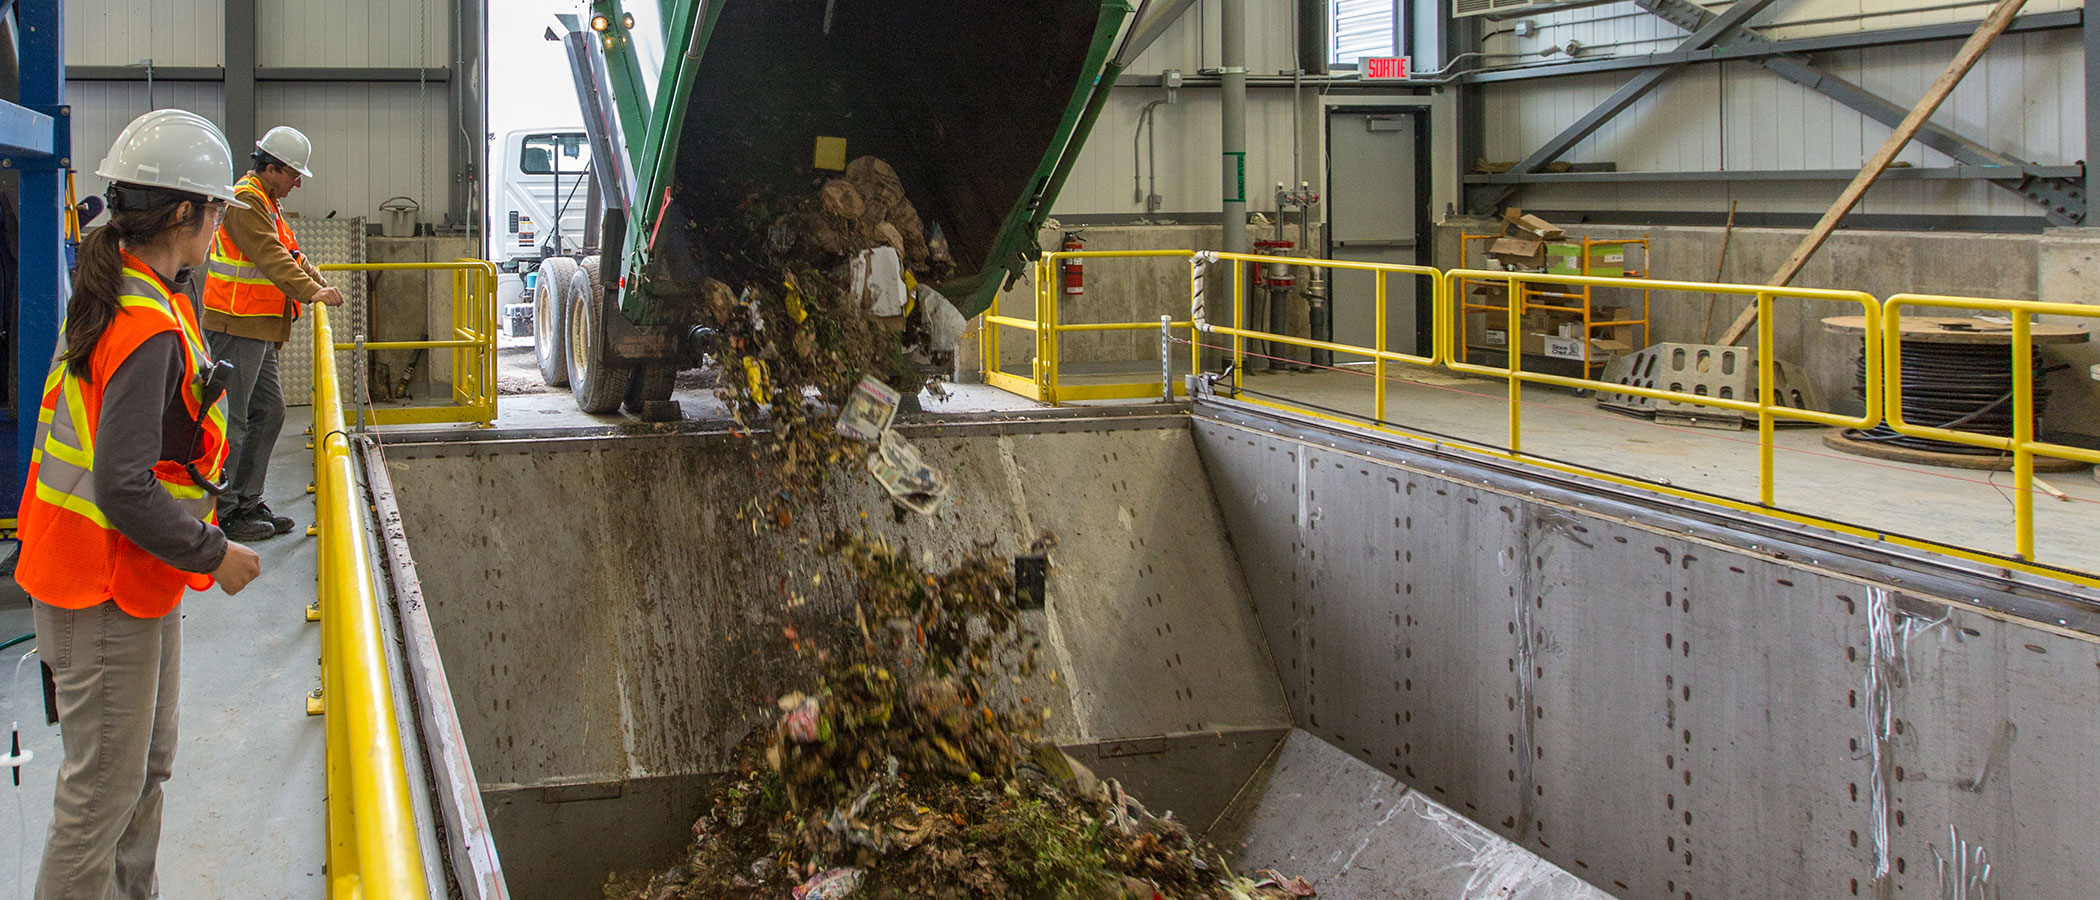 Two employees watch as a garbage truck delivers domestic and municipal waste.